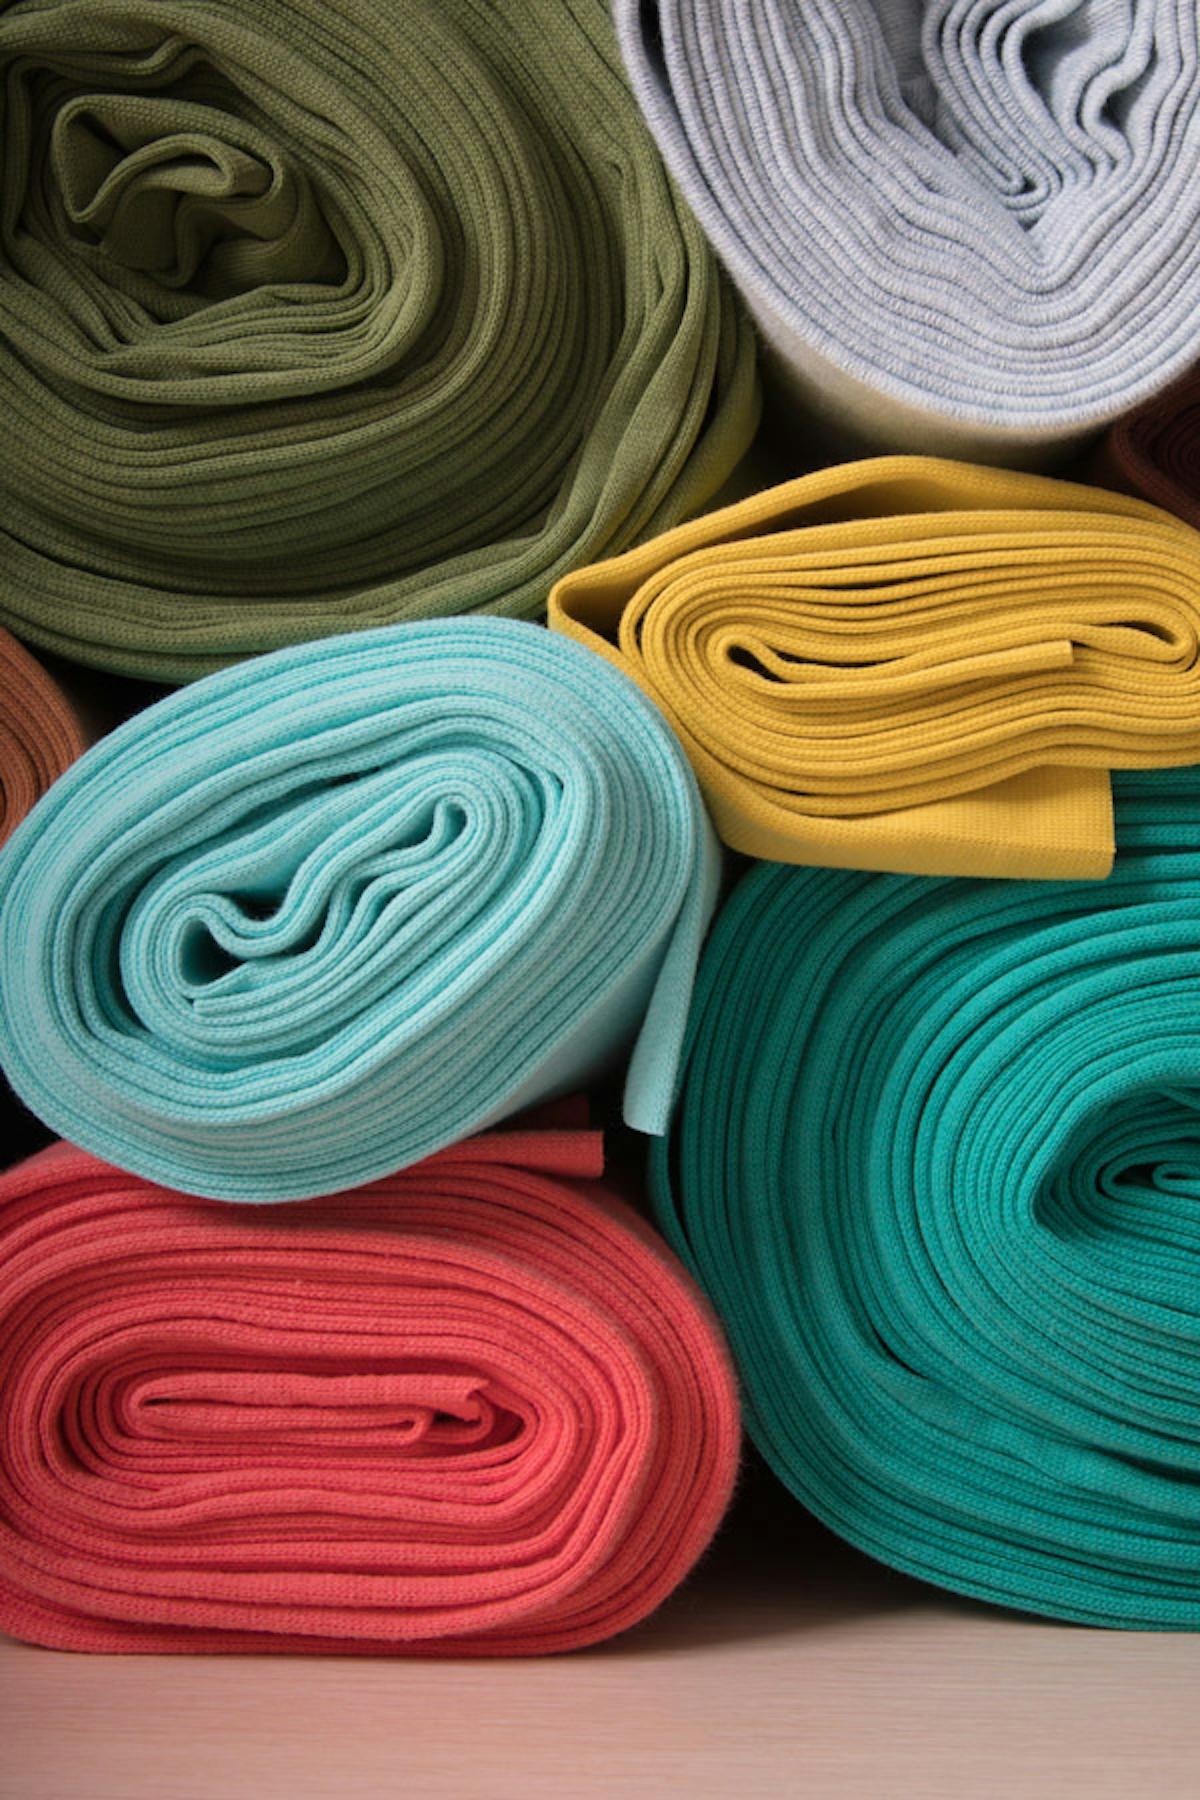 Types of Knit Fabric and their Application, Material for Sewing